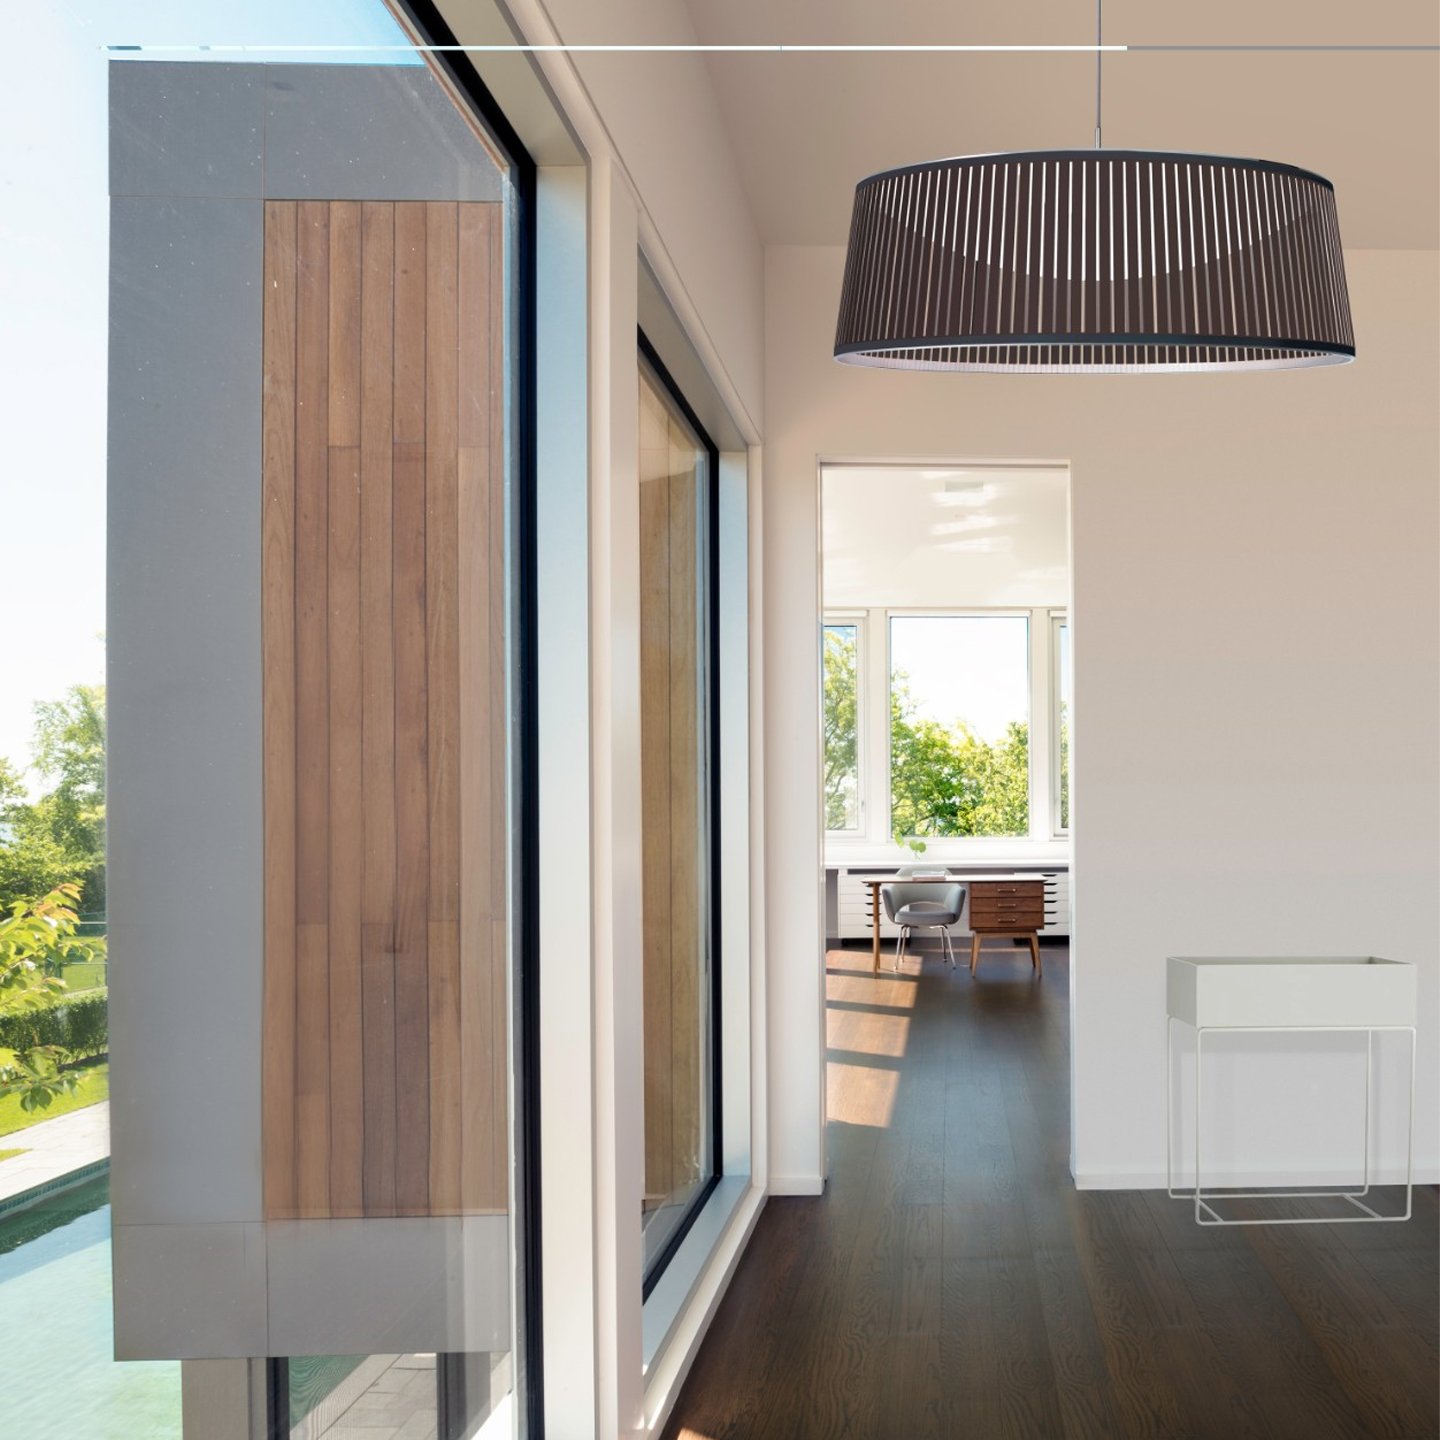 Haworth Solis Drum Lighting in black color in open home space with office and outdoor pool